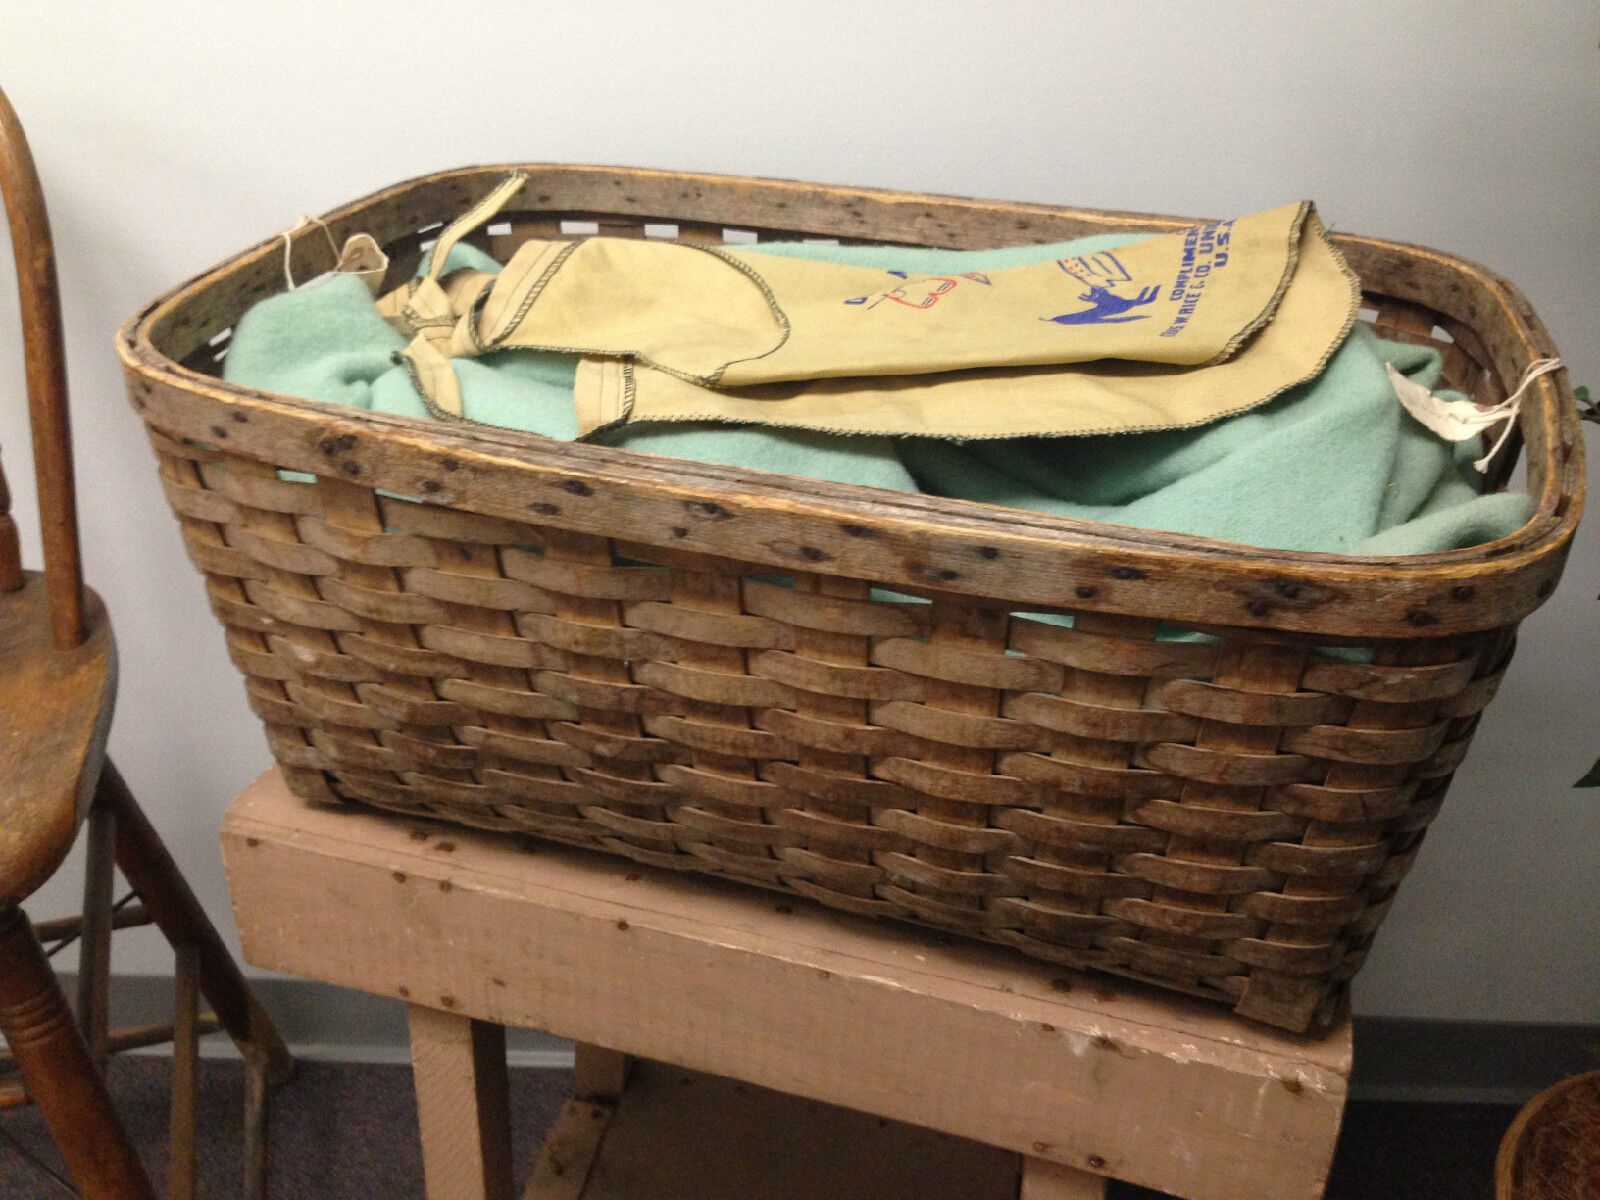 Antique B. G. HIGGINS Basket Pounded ASH Laundry West Chesterfield MASS.